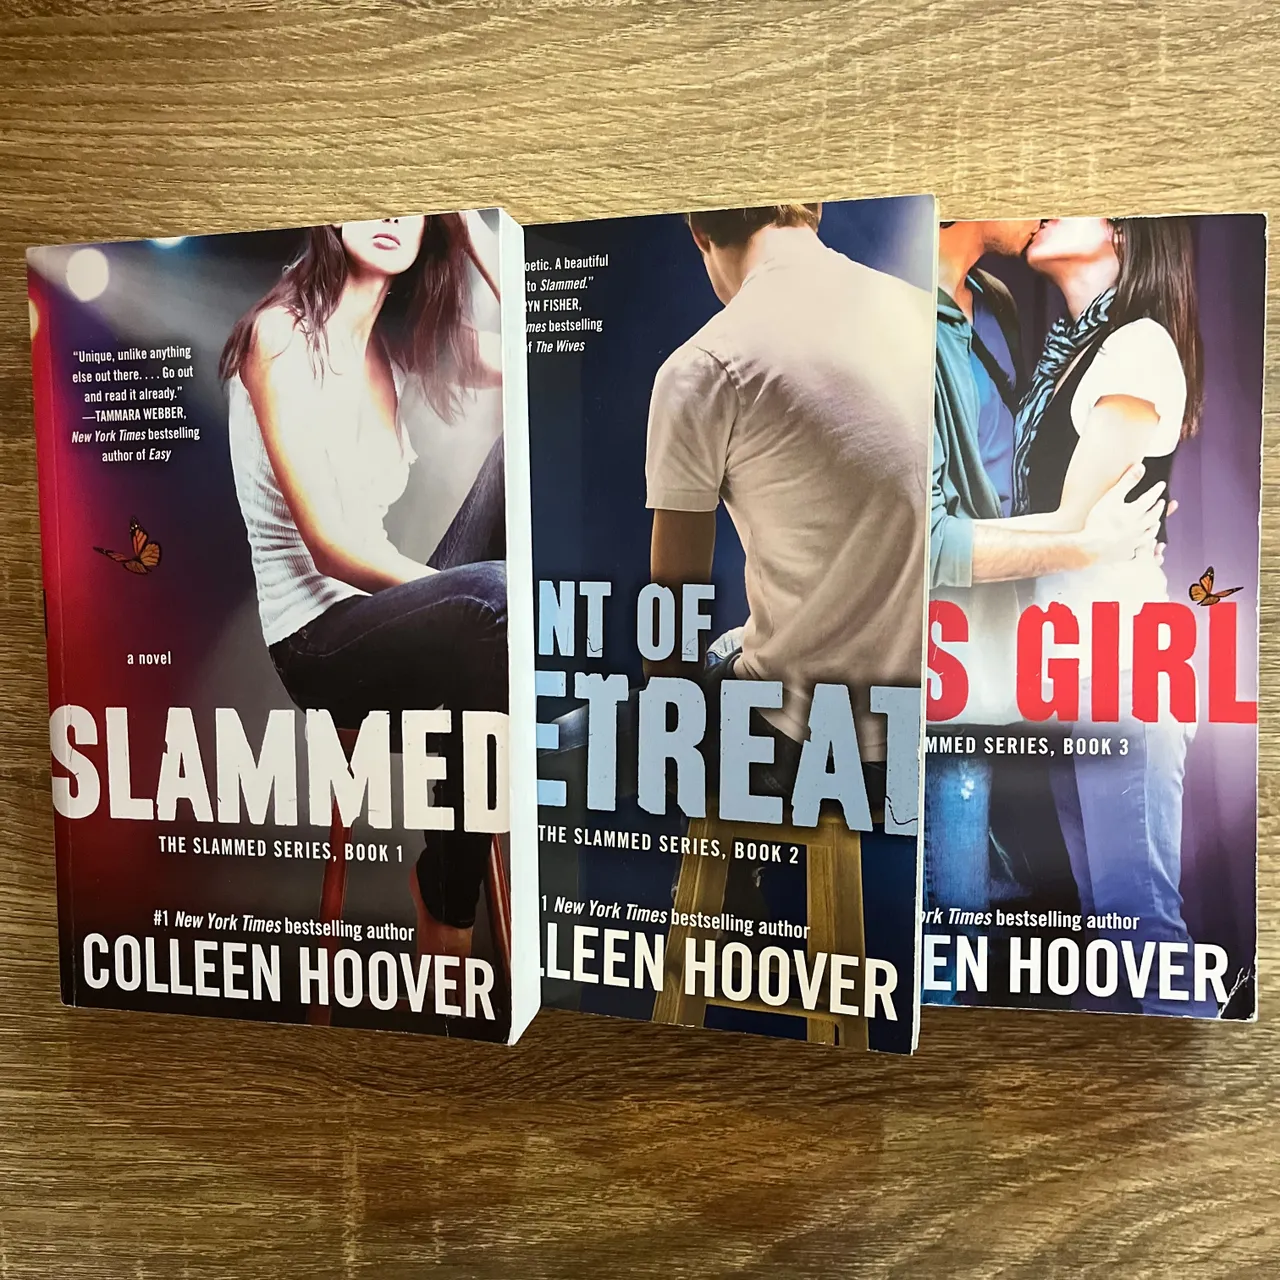 Colleen Hoover Books photo 1